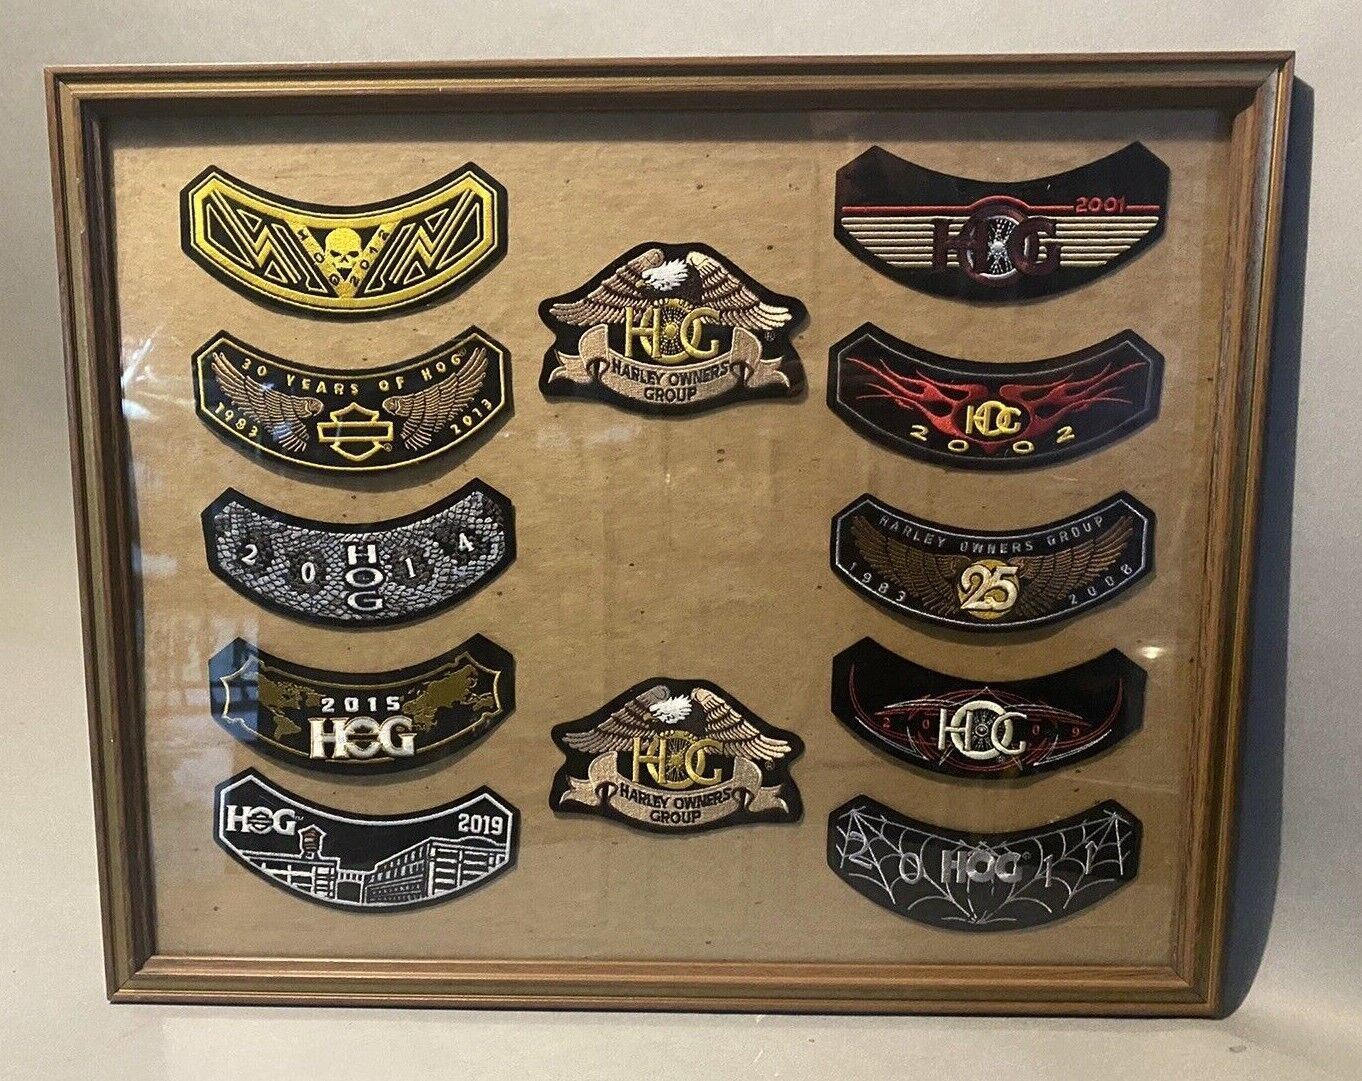 Harley Owners Group Framed Collection of HOG Patches